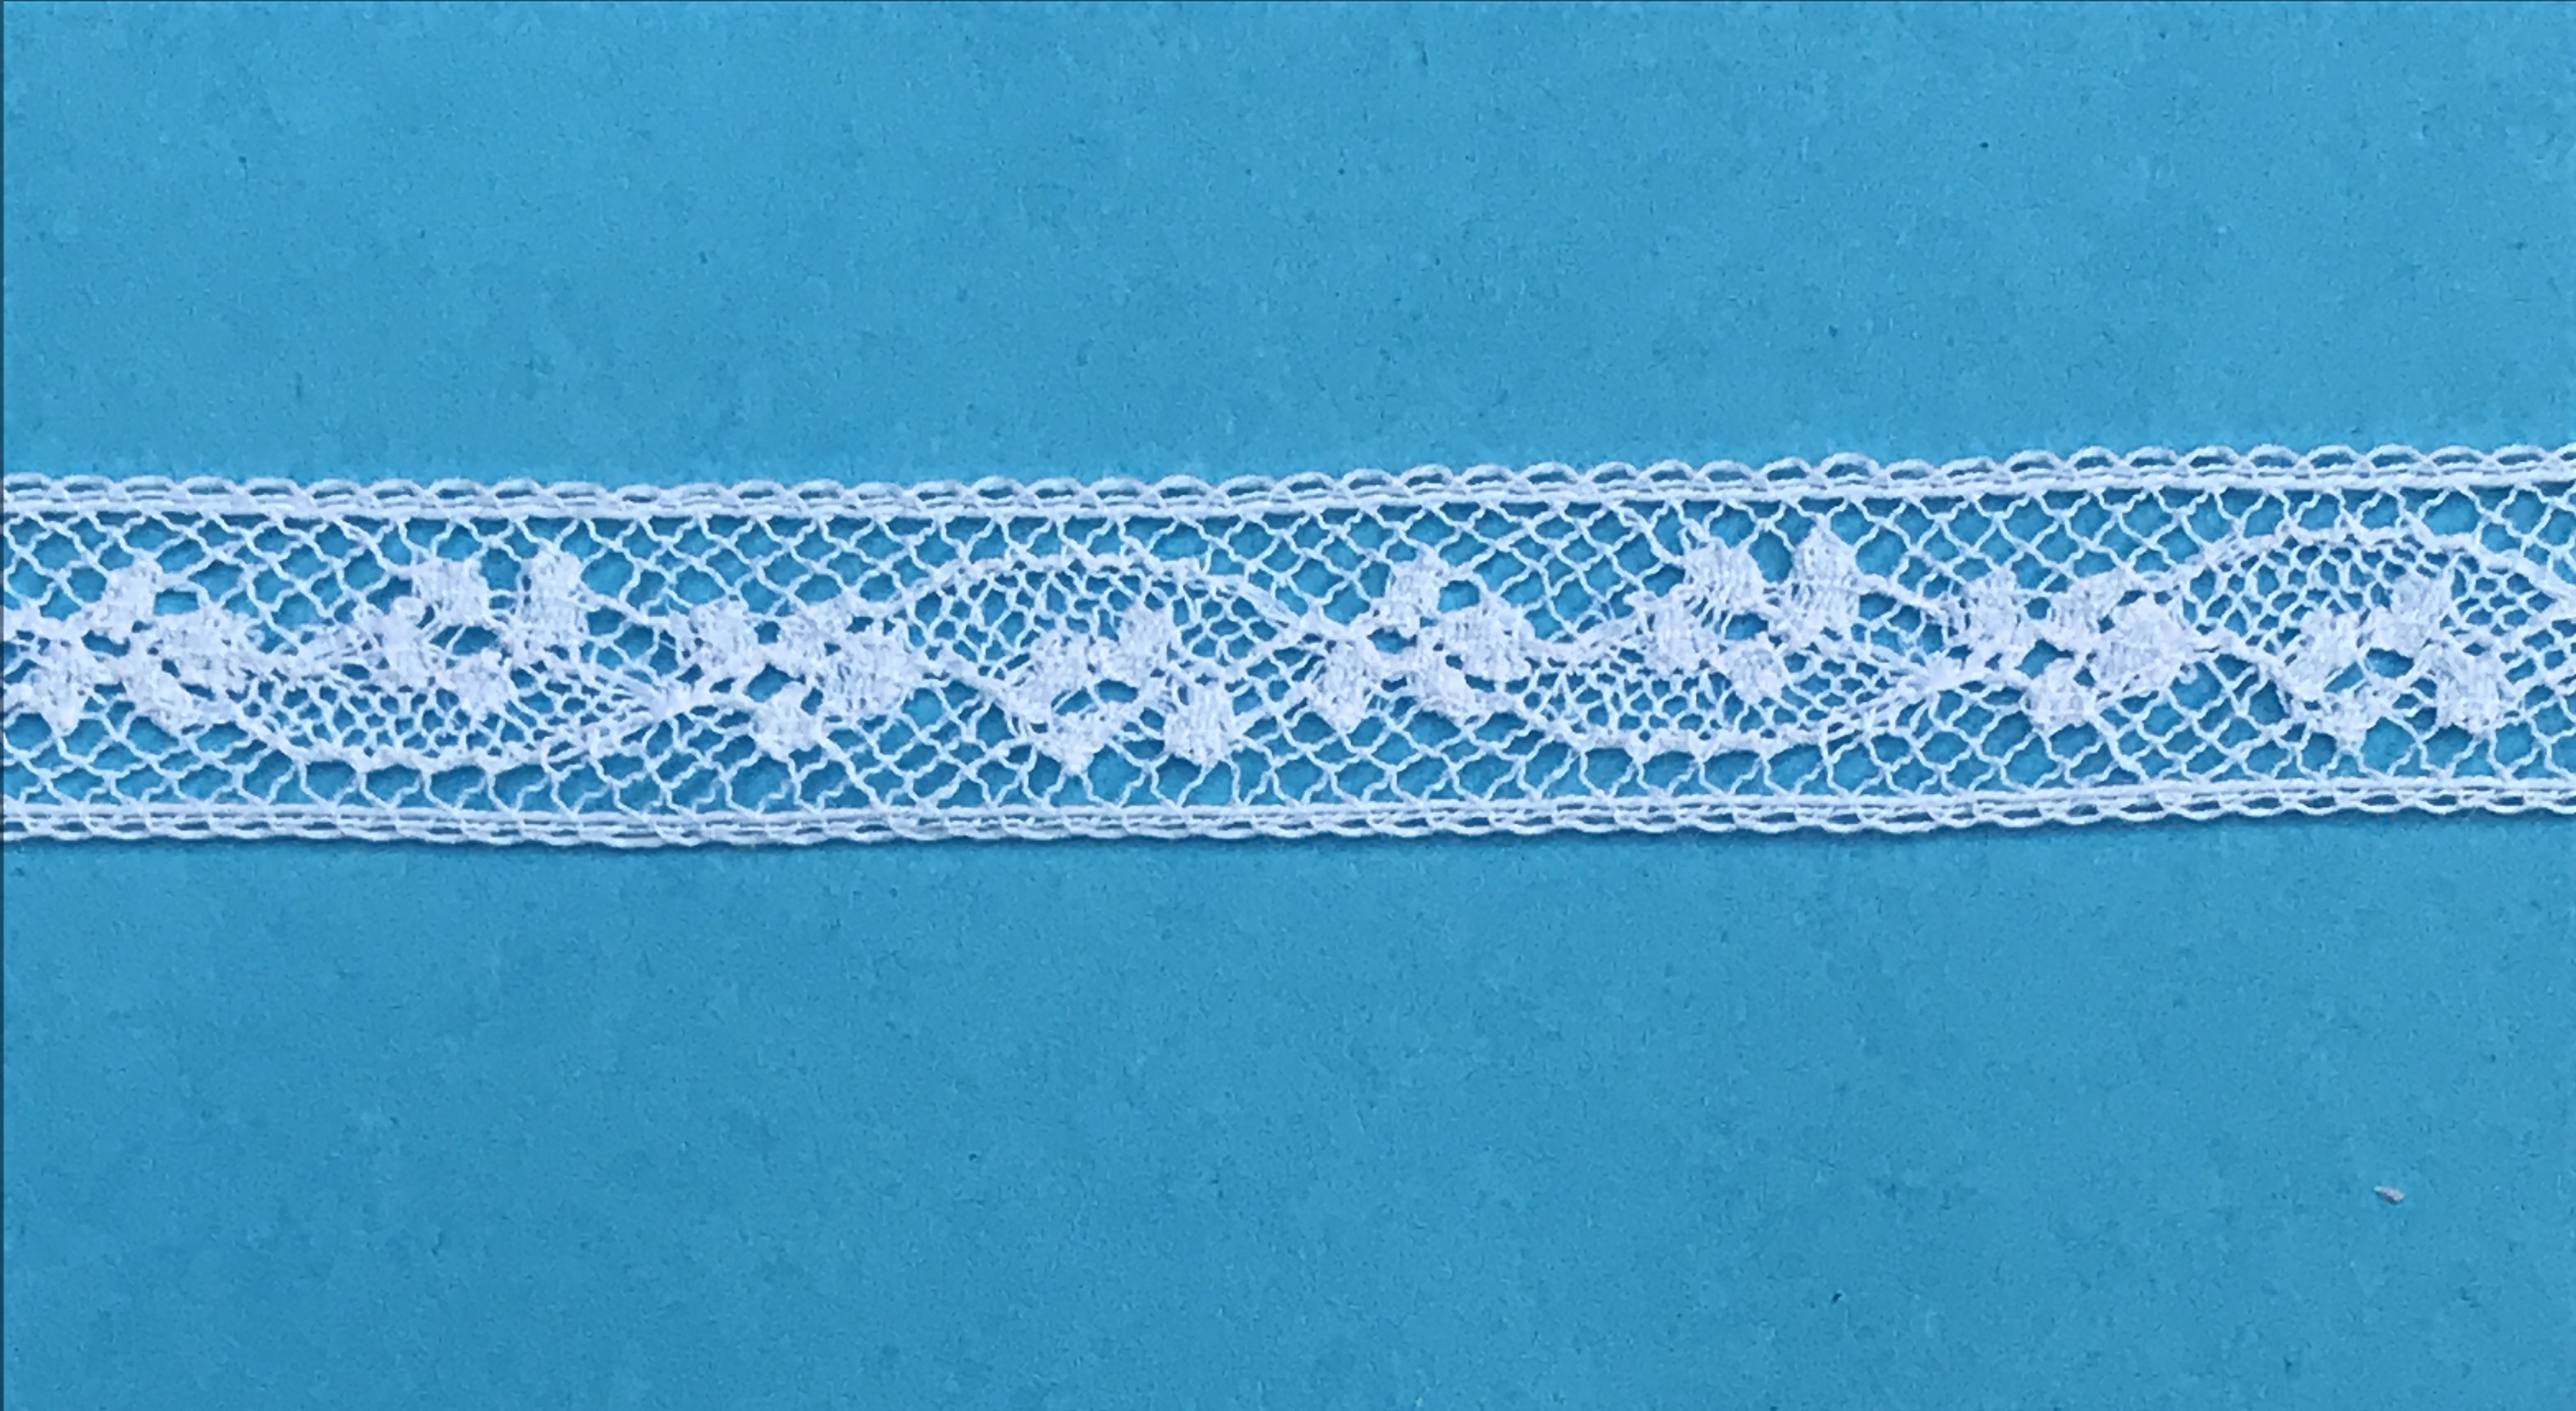  Lace Insertion-3/8" Wide